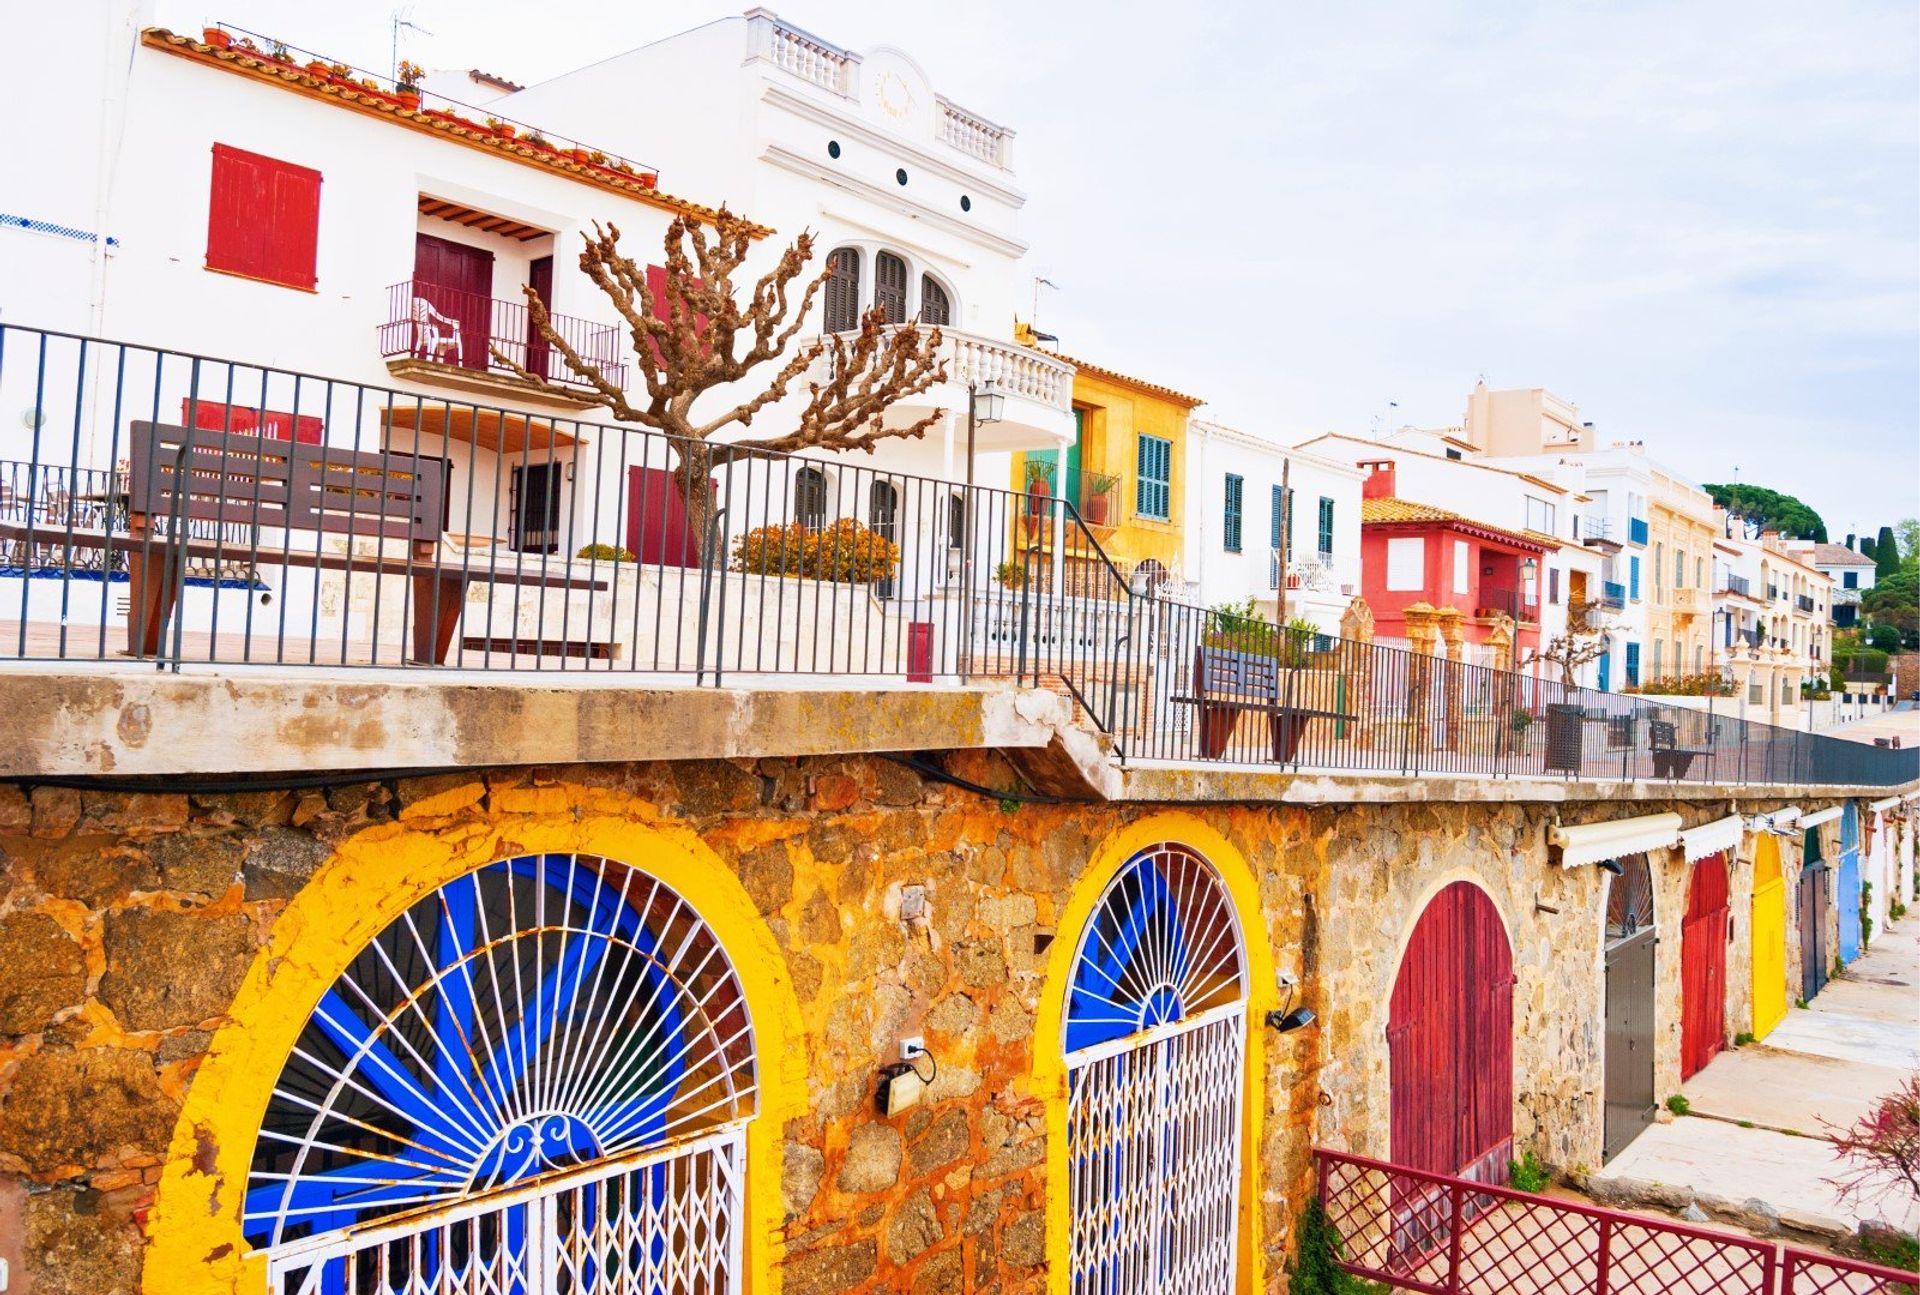 Postcard perfect! Colourful Mediterranean architecture unspoiled by tourism